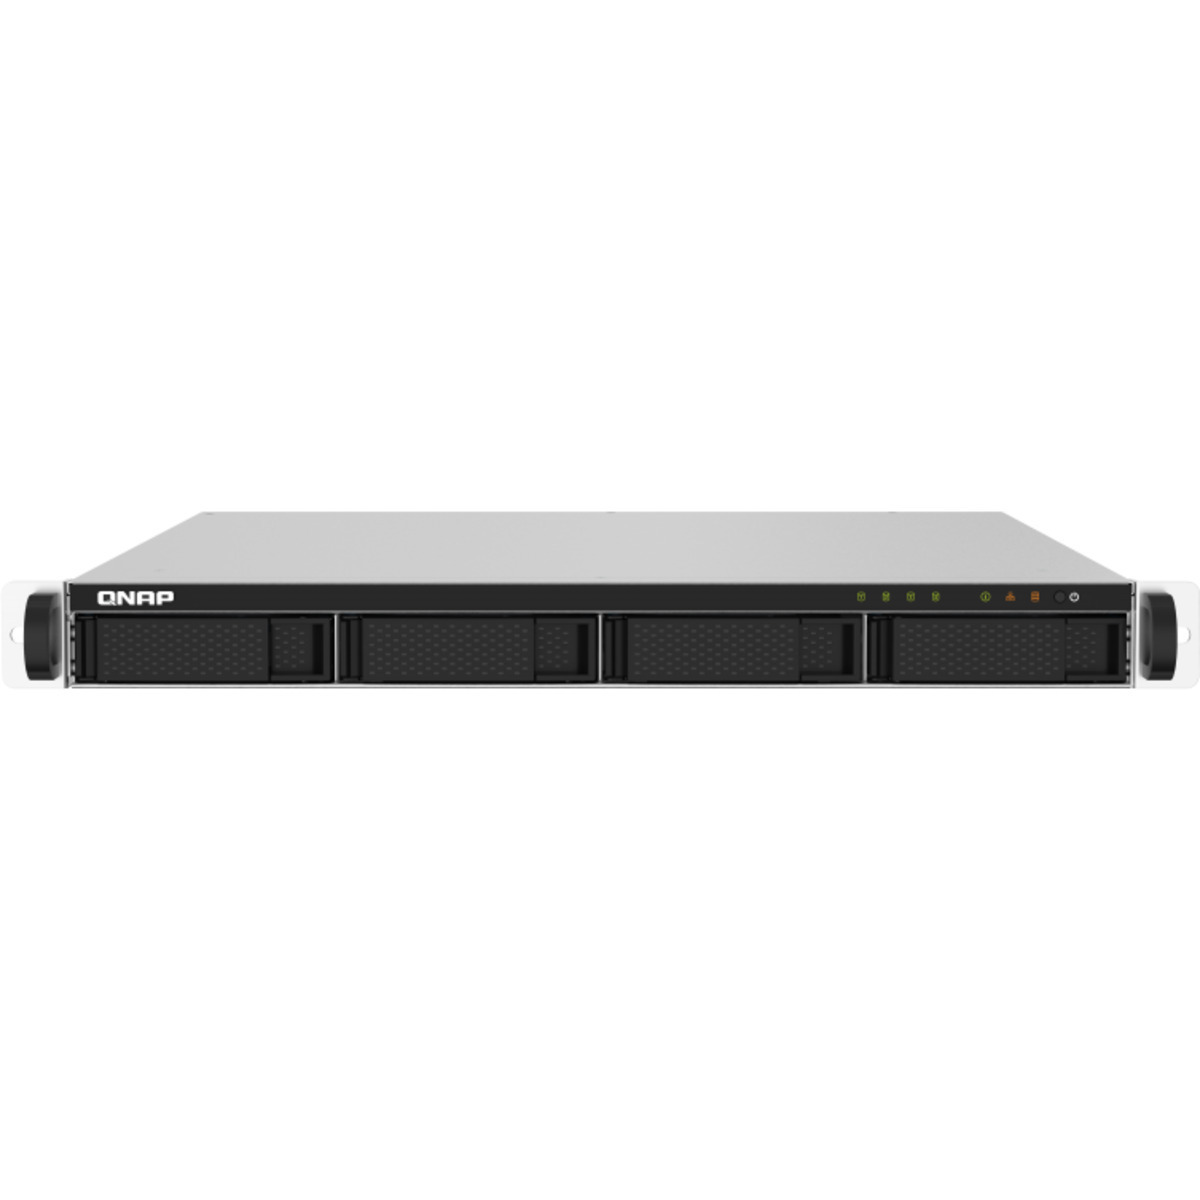 QNAP TS-432PXU 48tb 4-Bay RackMount Personal / Basic Home / Small Office NAS - Network Attached Storage Device 2x24tb Seagate IronWolf Pro ST24000NT002 3.5 7200rpm SATA 6Gb/s HDD NAS Class Drives Installed - Burn-In Tested - FREE RAM UPGRADE TS-432PXU